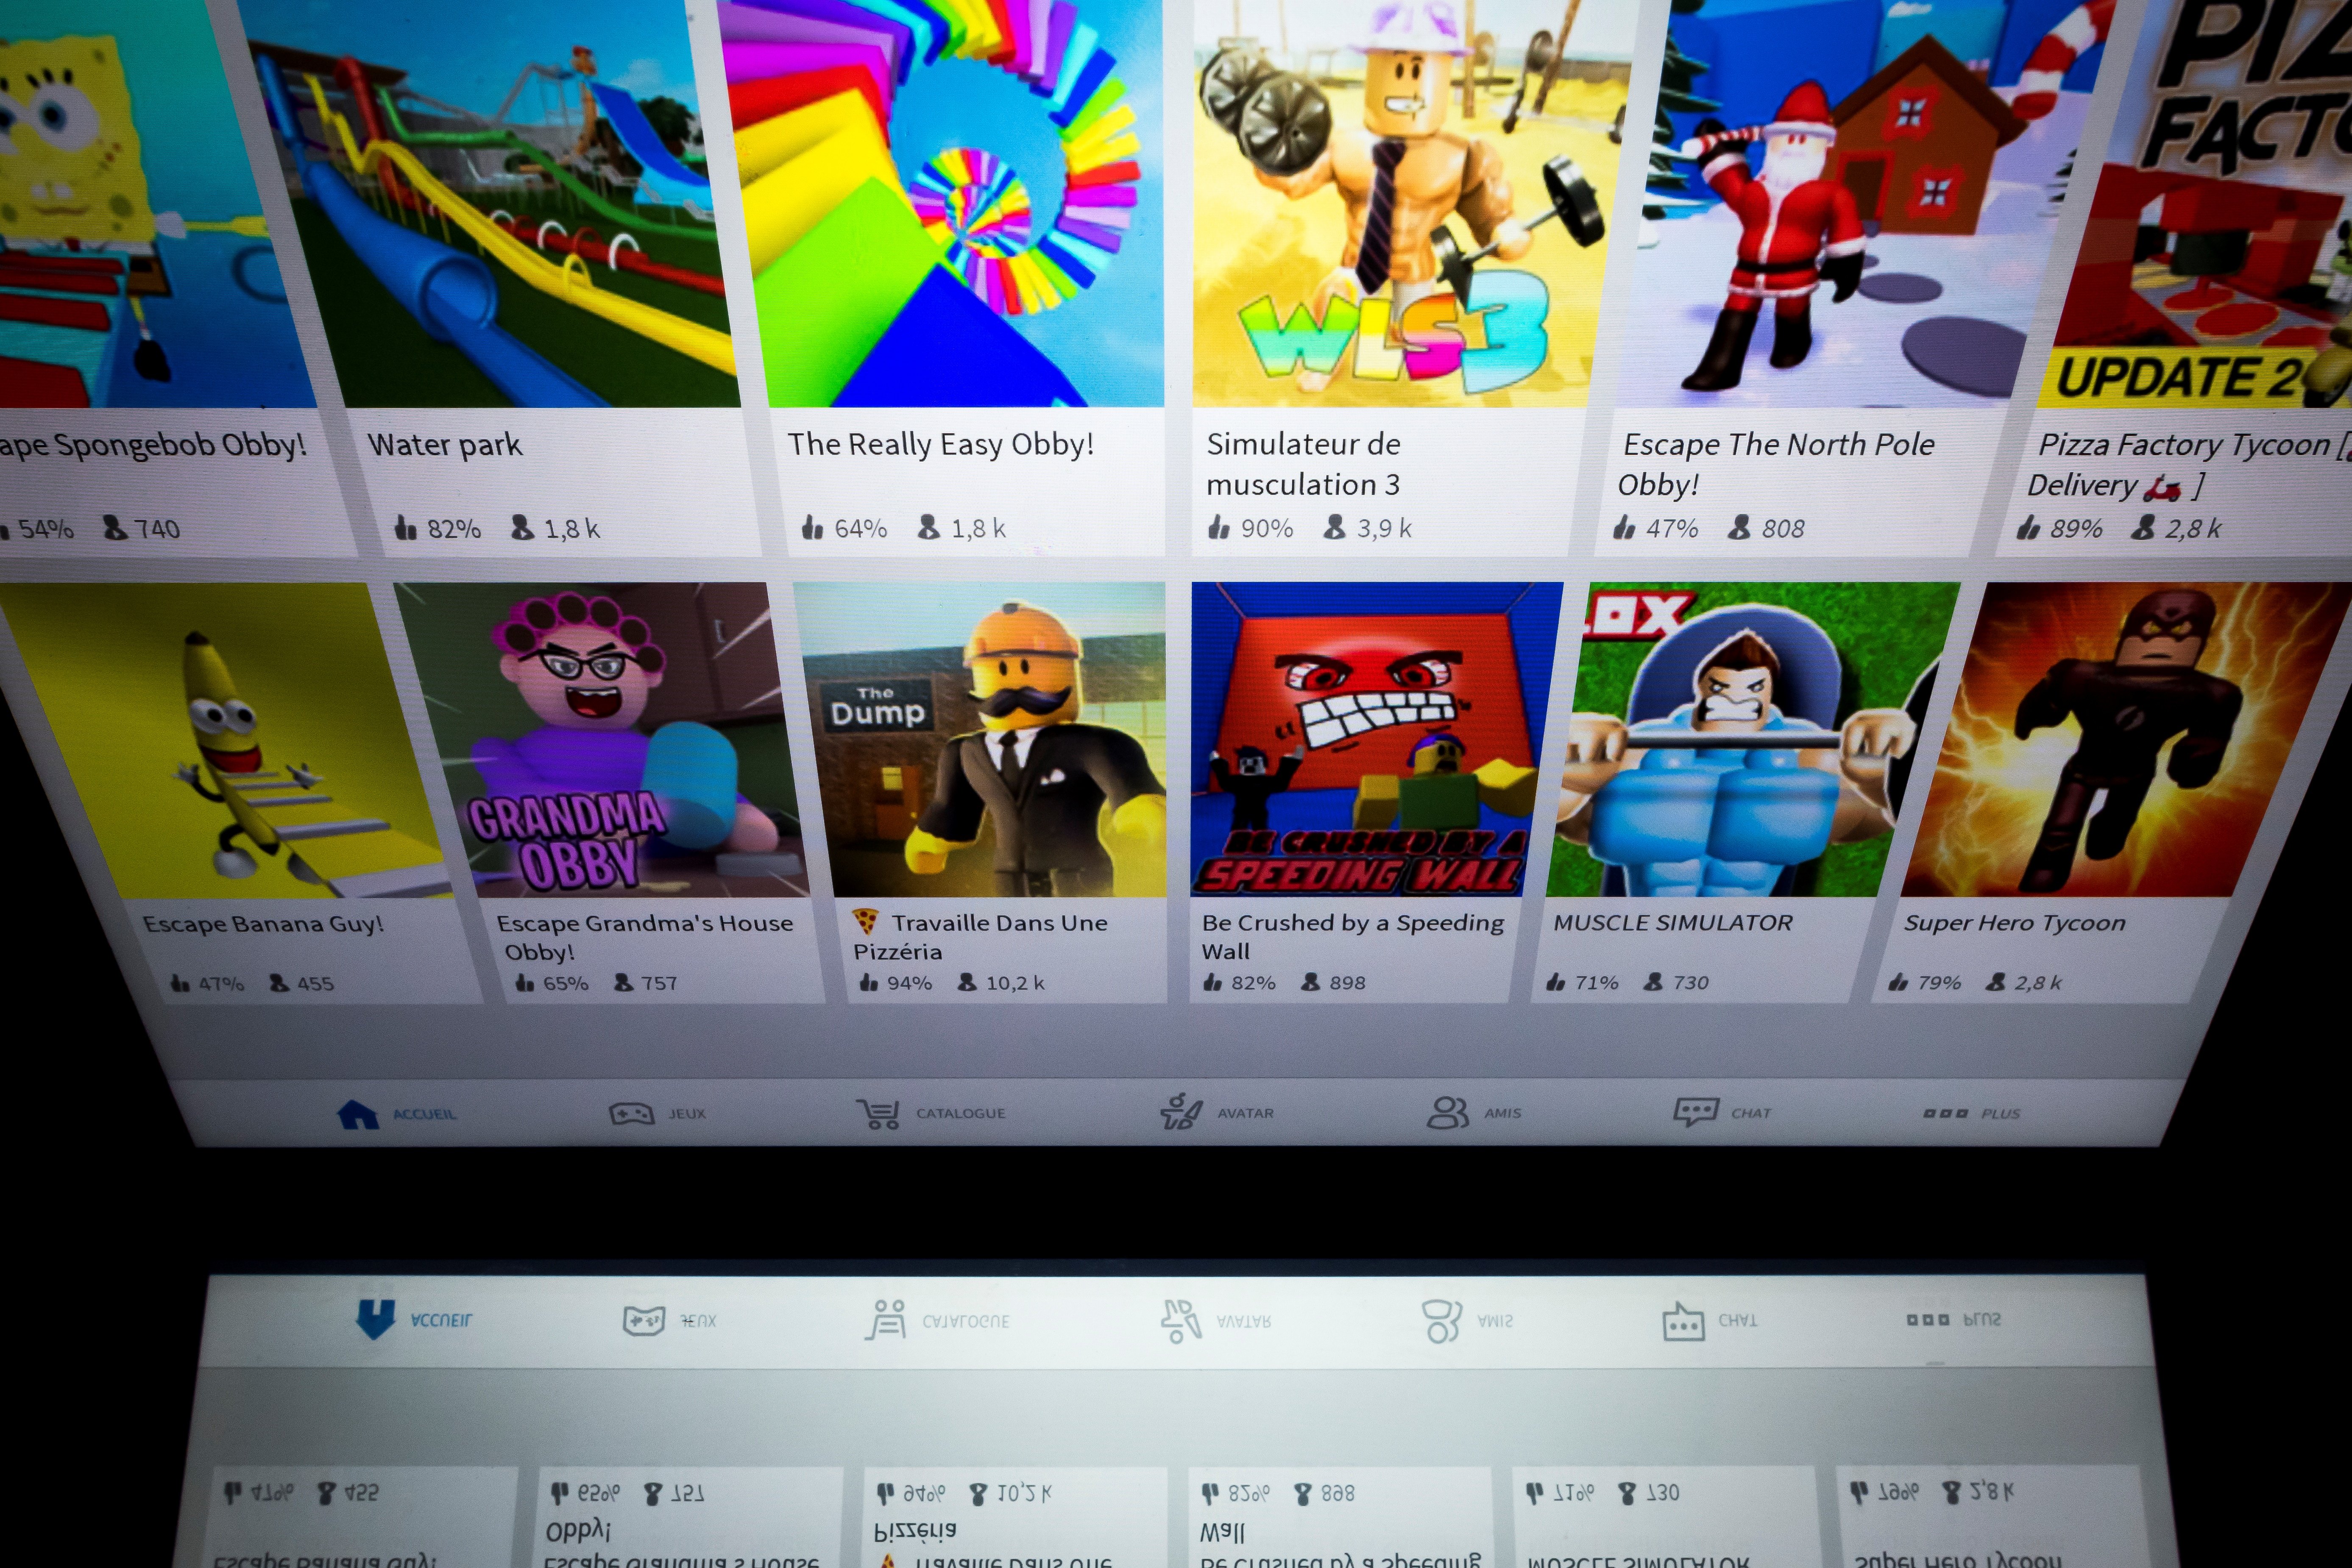 Tiktok Owner Bytedance Boosts Investment In Roblox Like Video Game Platform In Race With Tencent To Create The Metaverse South China Morning Post - unit games robloxlike crayta crayta gamingmatneytechcrunch